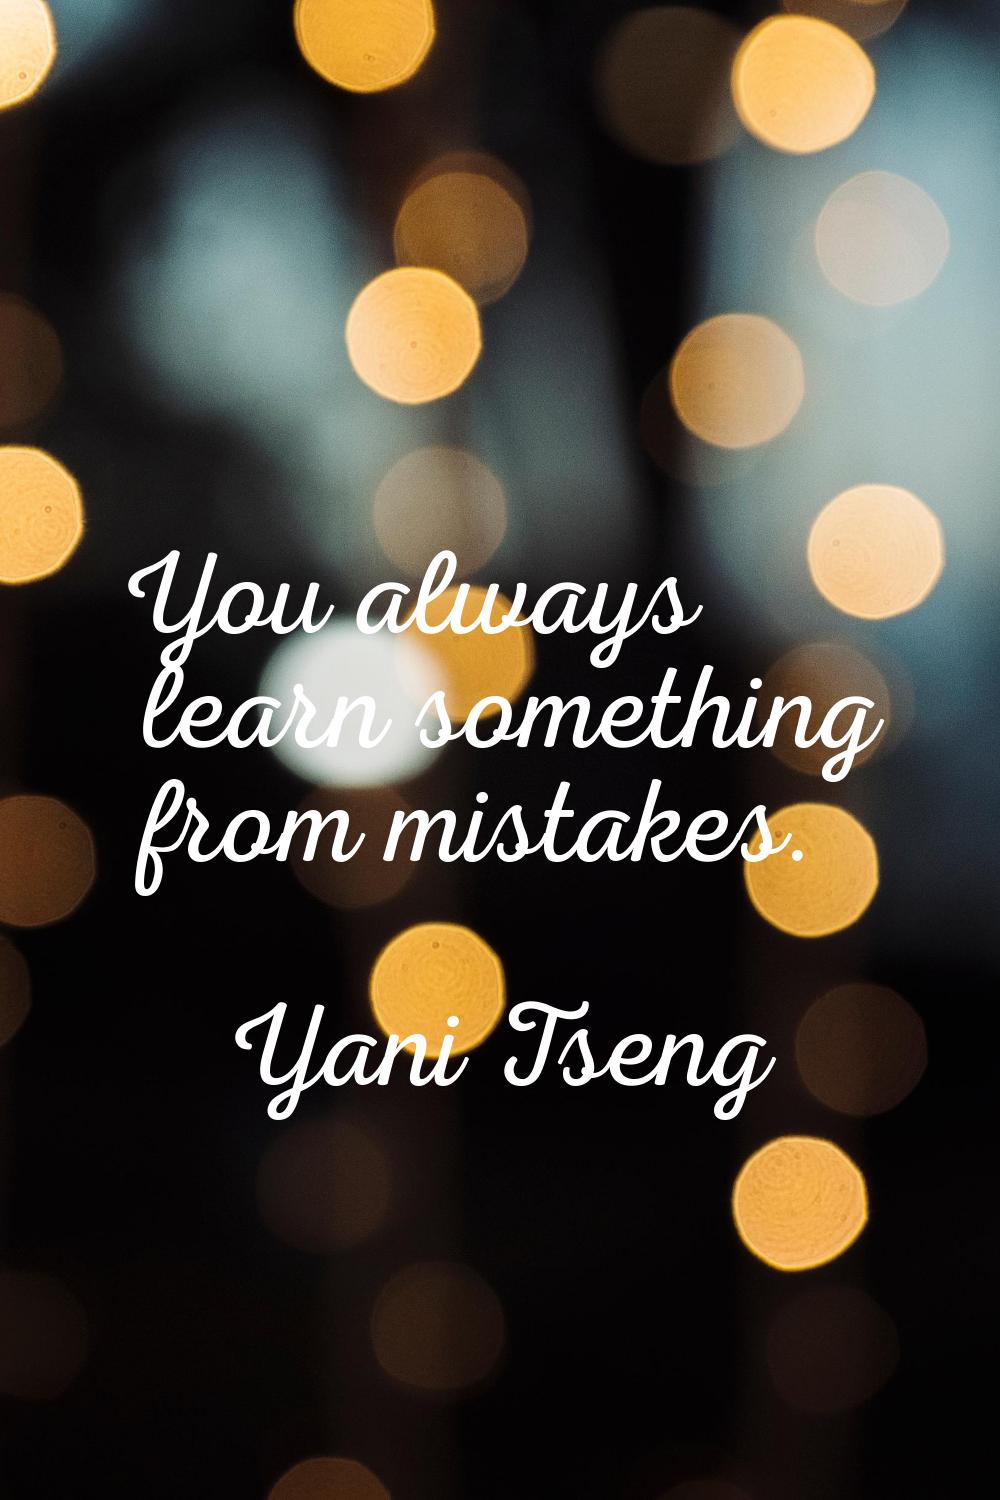 You always learn something from mistakes.